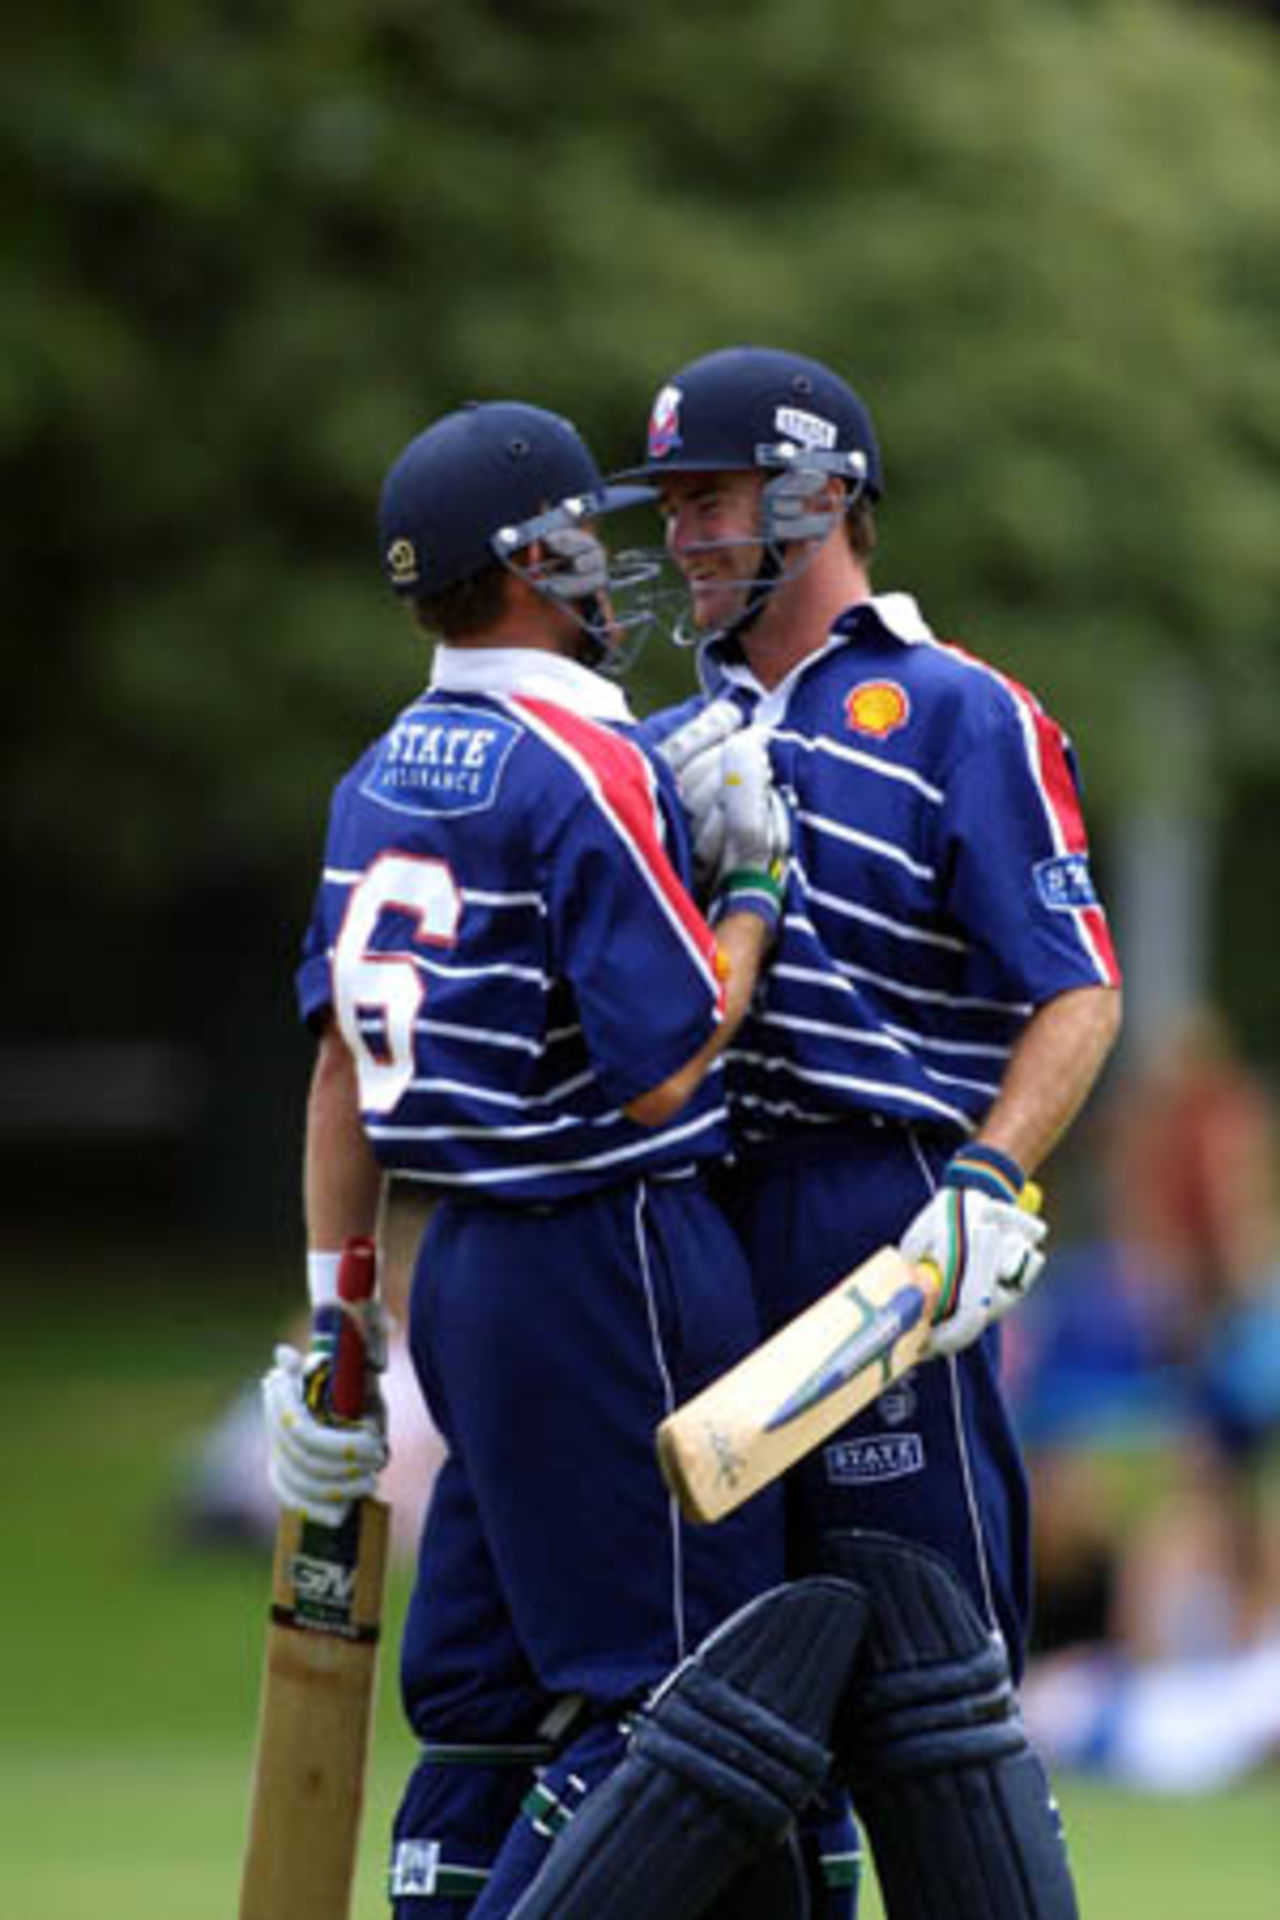 Auckland captain congratulates batting partner Lou Vincent upon reaching his second Shell Cup century, Shell Cup: Auckland v Northern Districts at Eden Park Outer Oval, Auckland, 18 January 2001